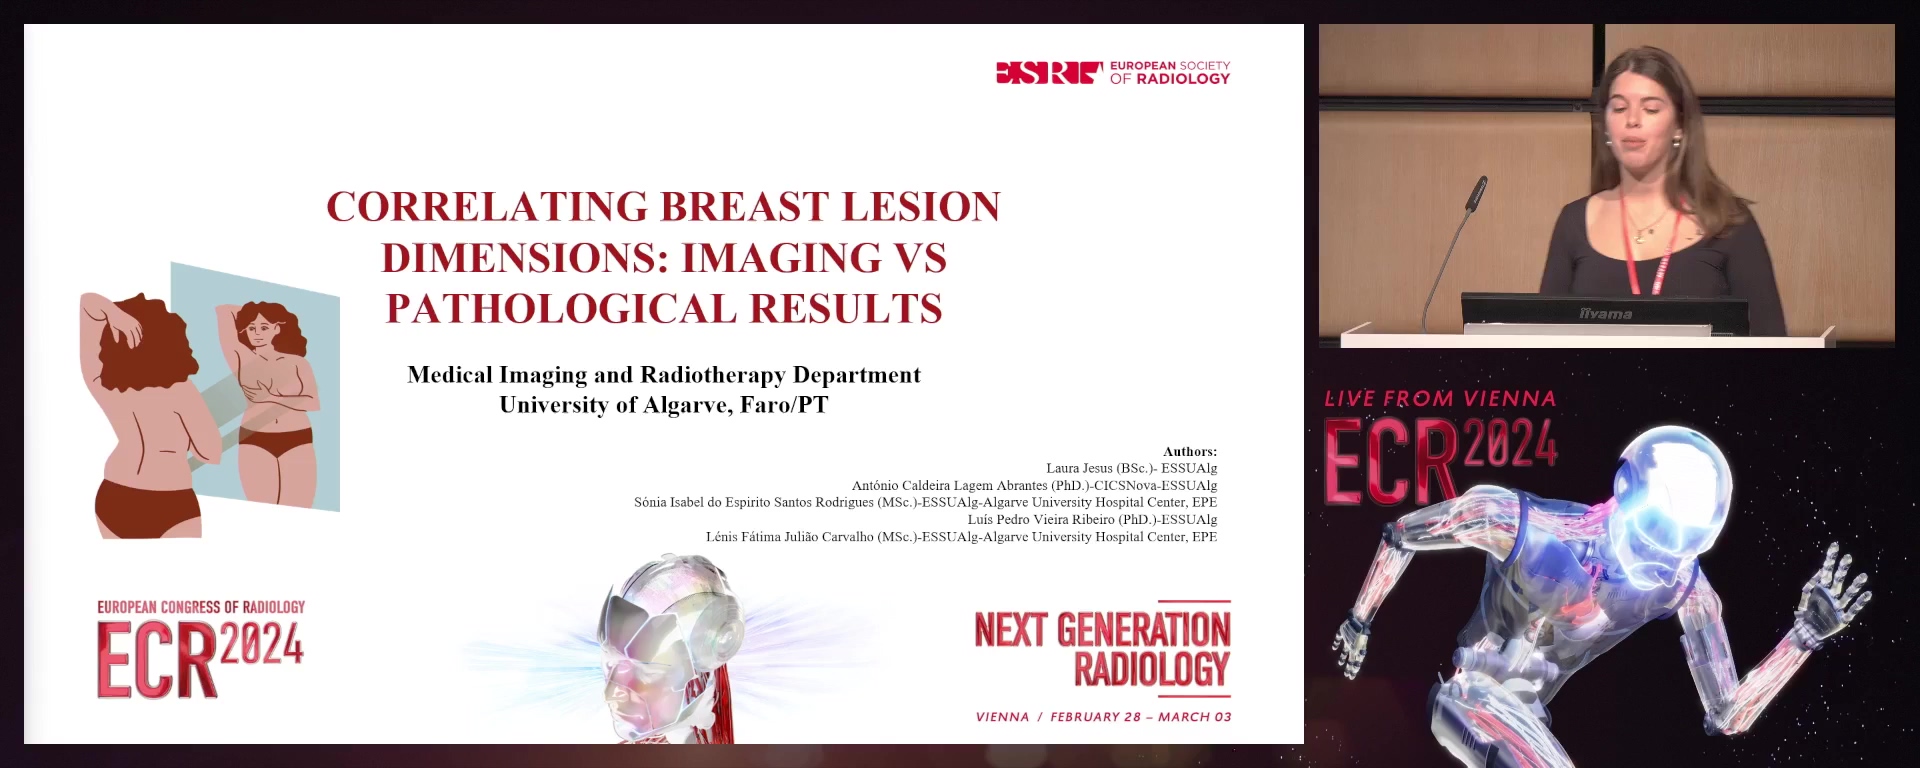 Correlating breast lesion dimensions: imaging vs pathological results